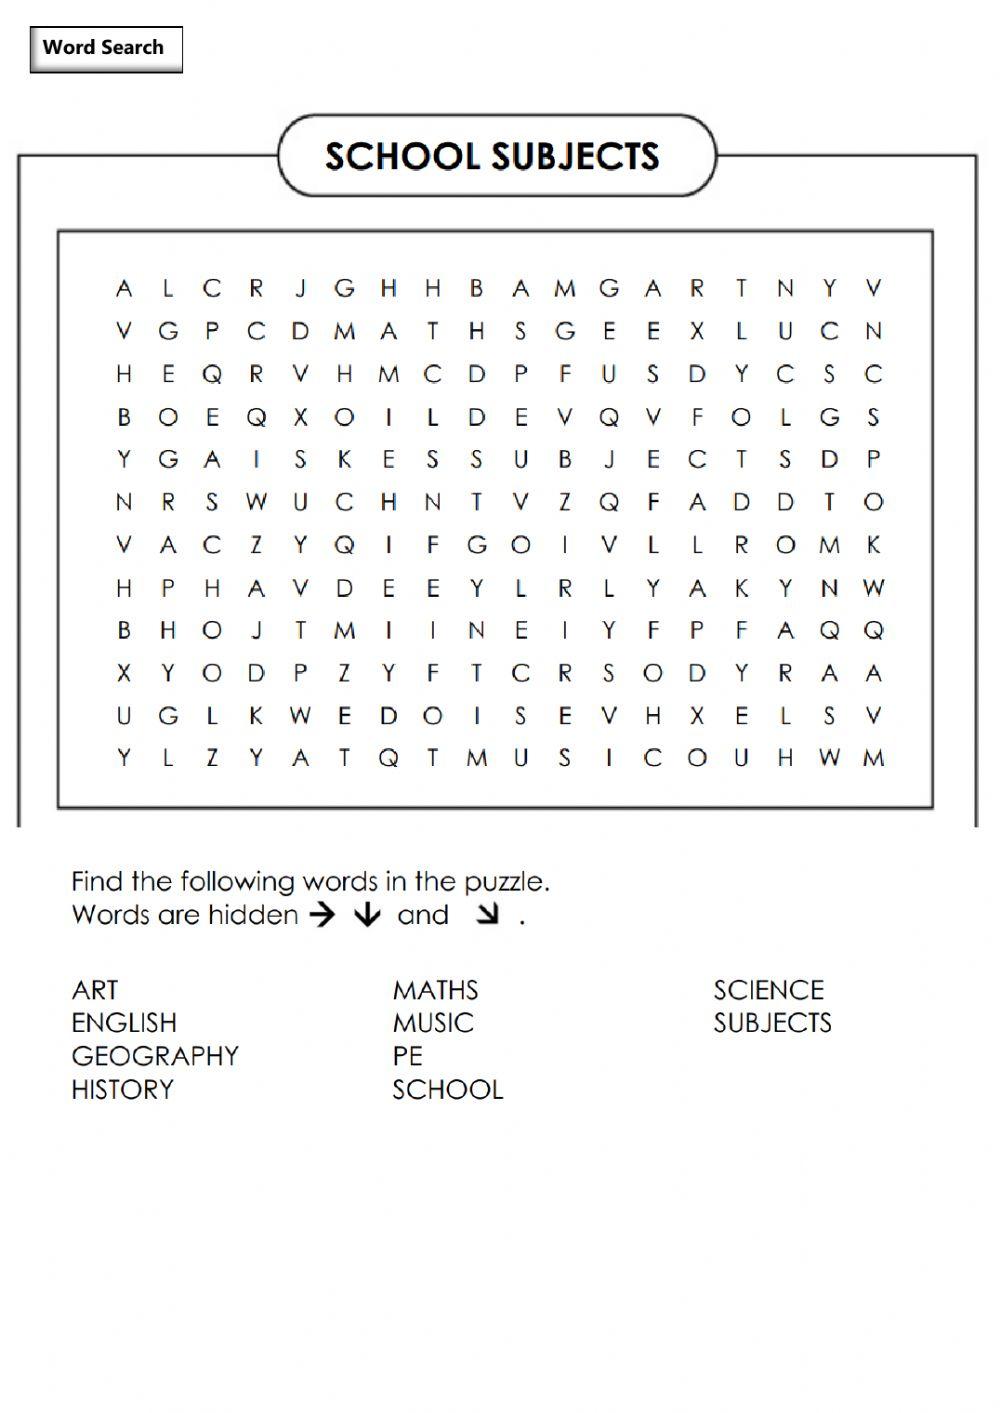 Subjects Listening + Word Search